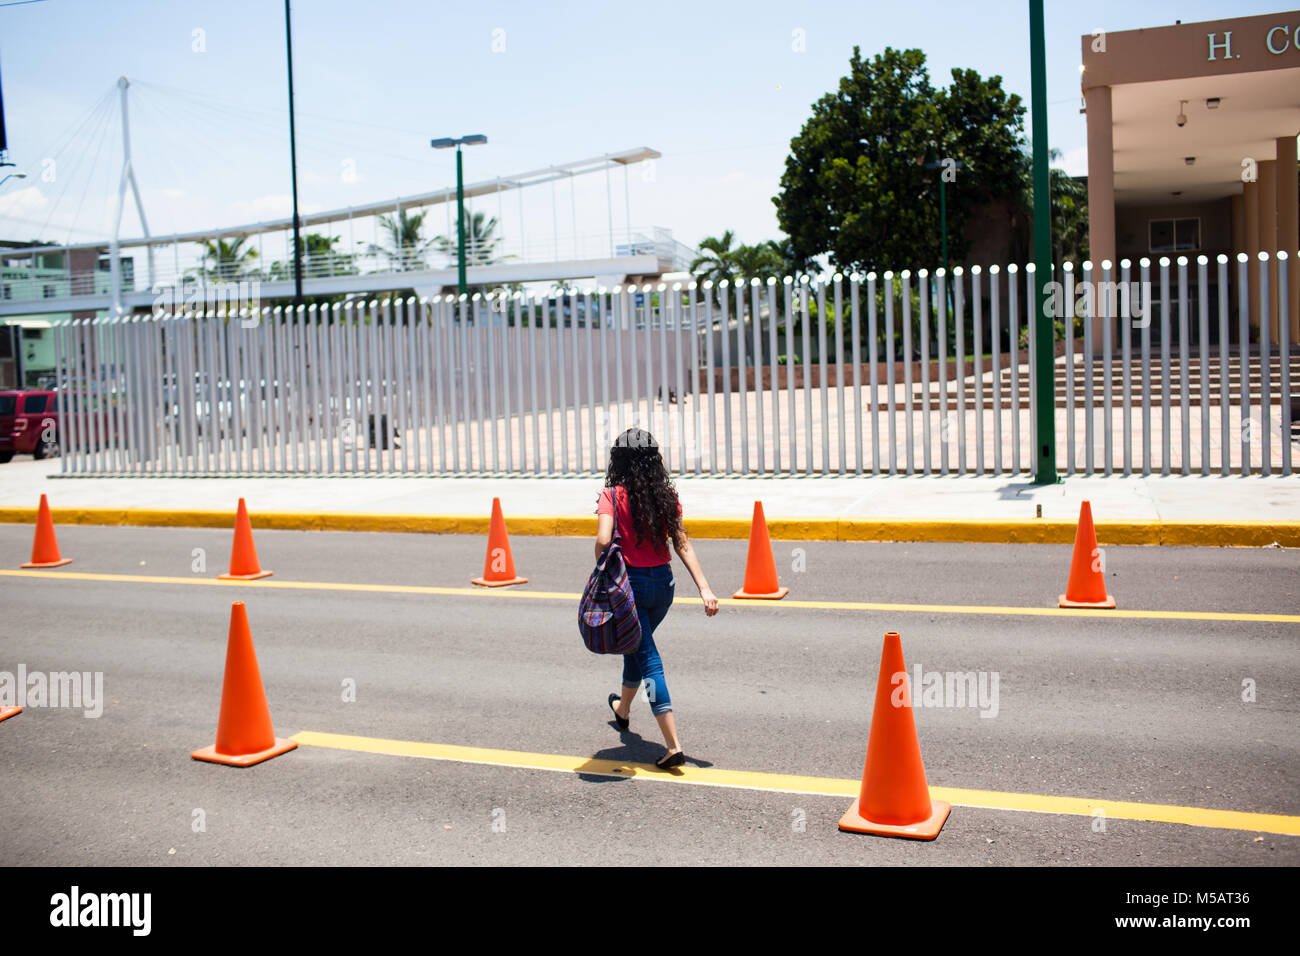 A lady leaves the Sinaloa State Congress in Culiac‡n, Sinaloa, Mexico on Thursday, July 16, 2015. Sinaloa is the Mexican state where the notorious drug cartel leader Joaqu’n 'El Chapo' Guzm‡n is from. Guzm‡n recently escaped from a maximum security Mexican prison for the second time. Stock Photo